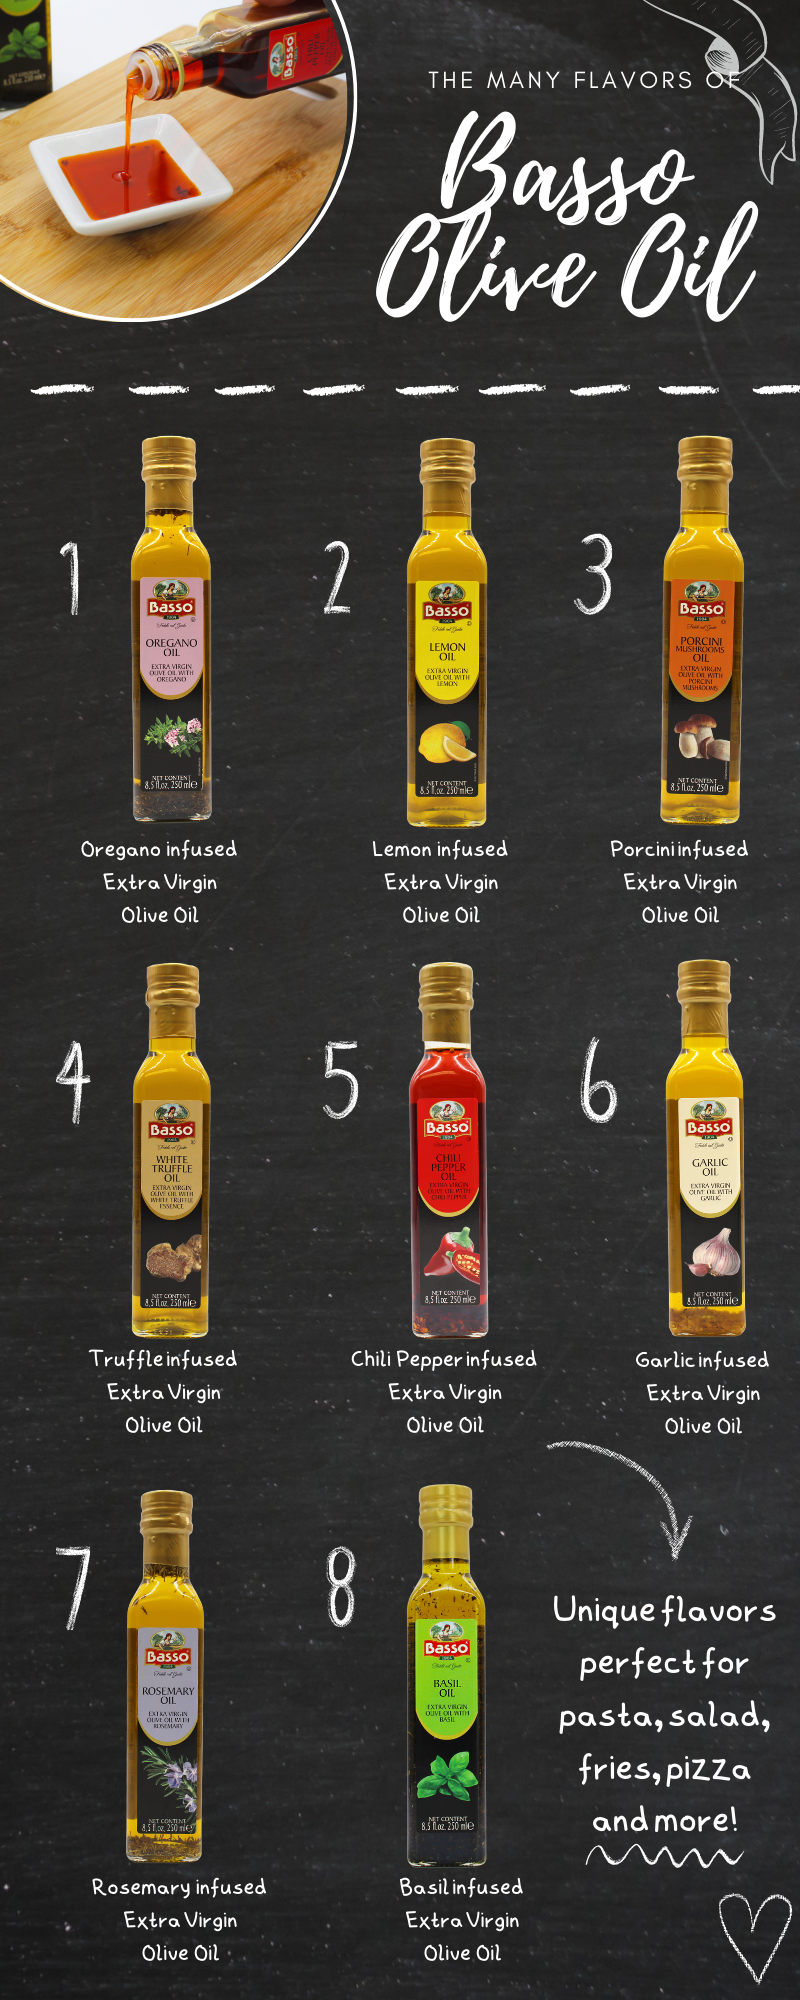 Basso Olive Oil Infographic